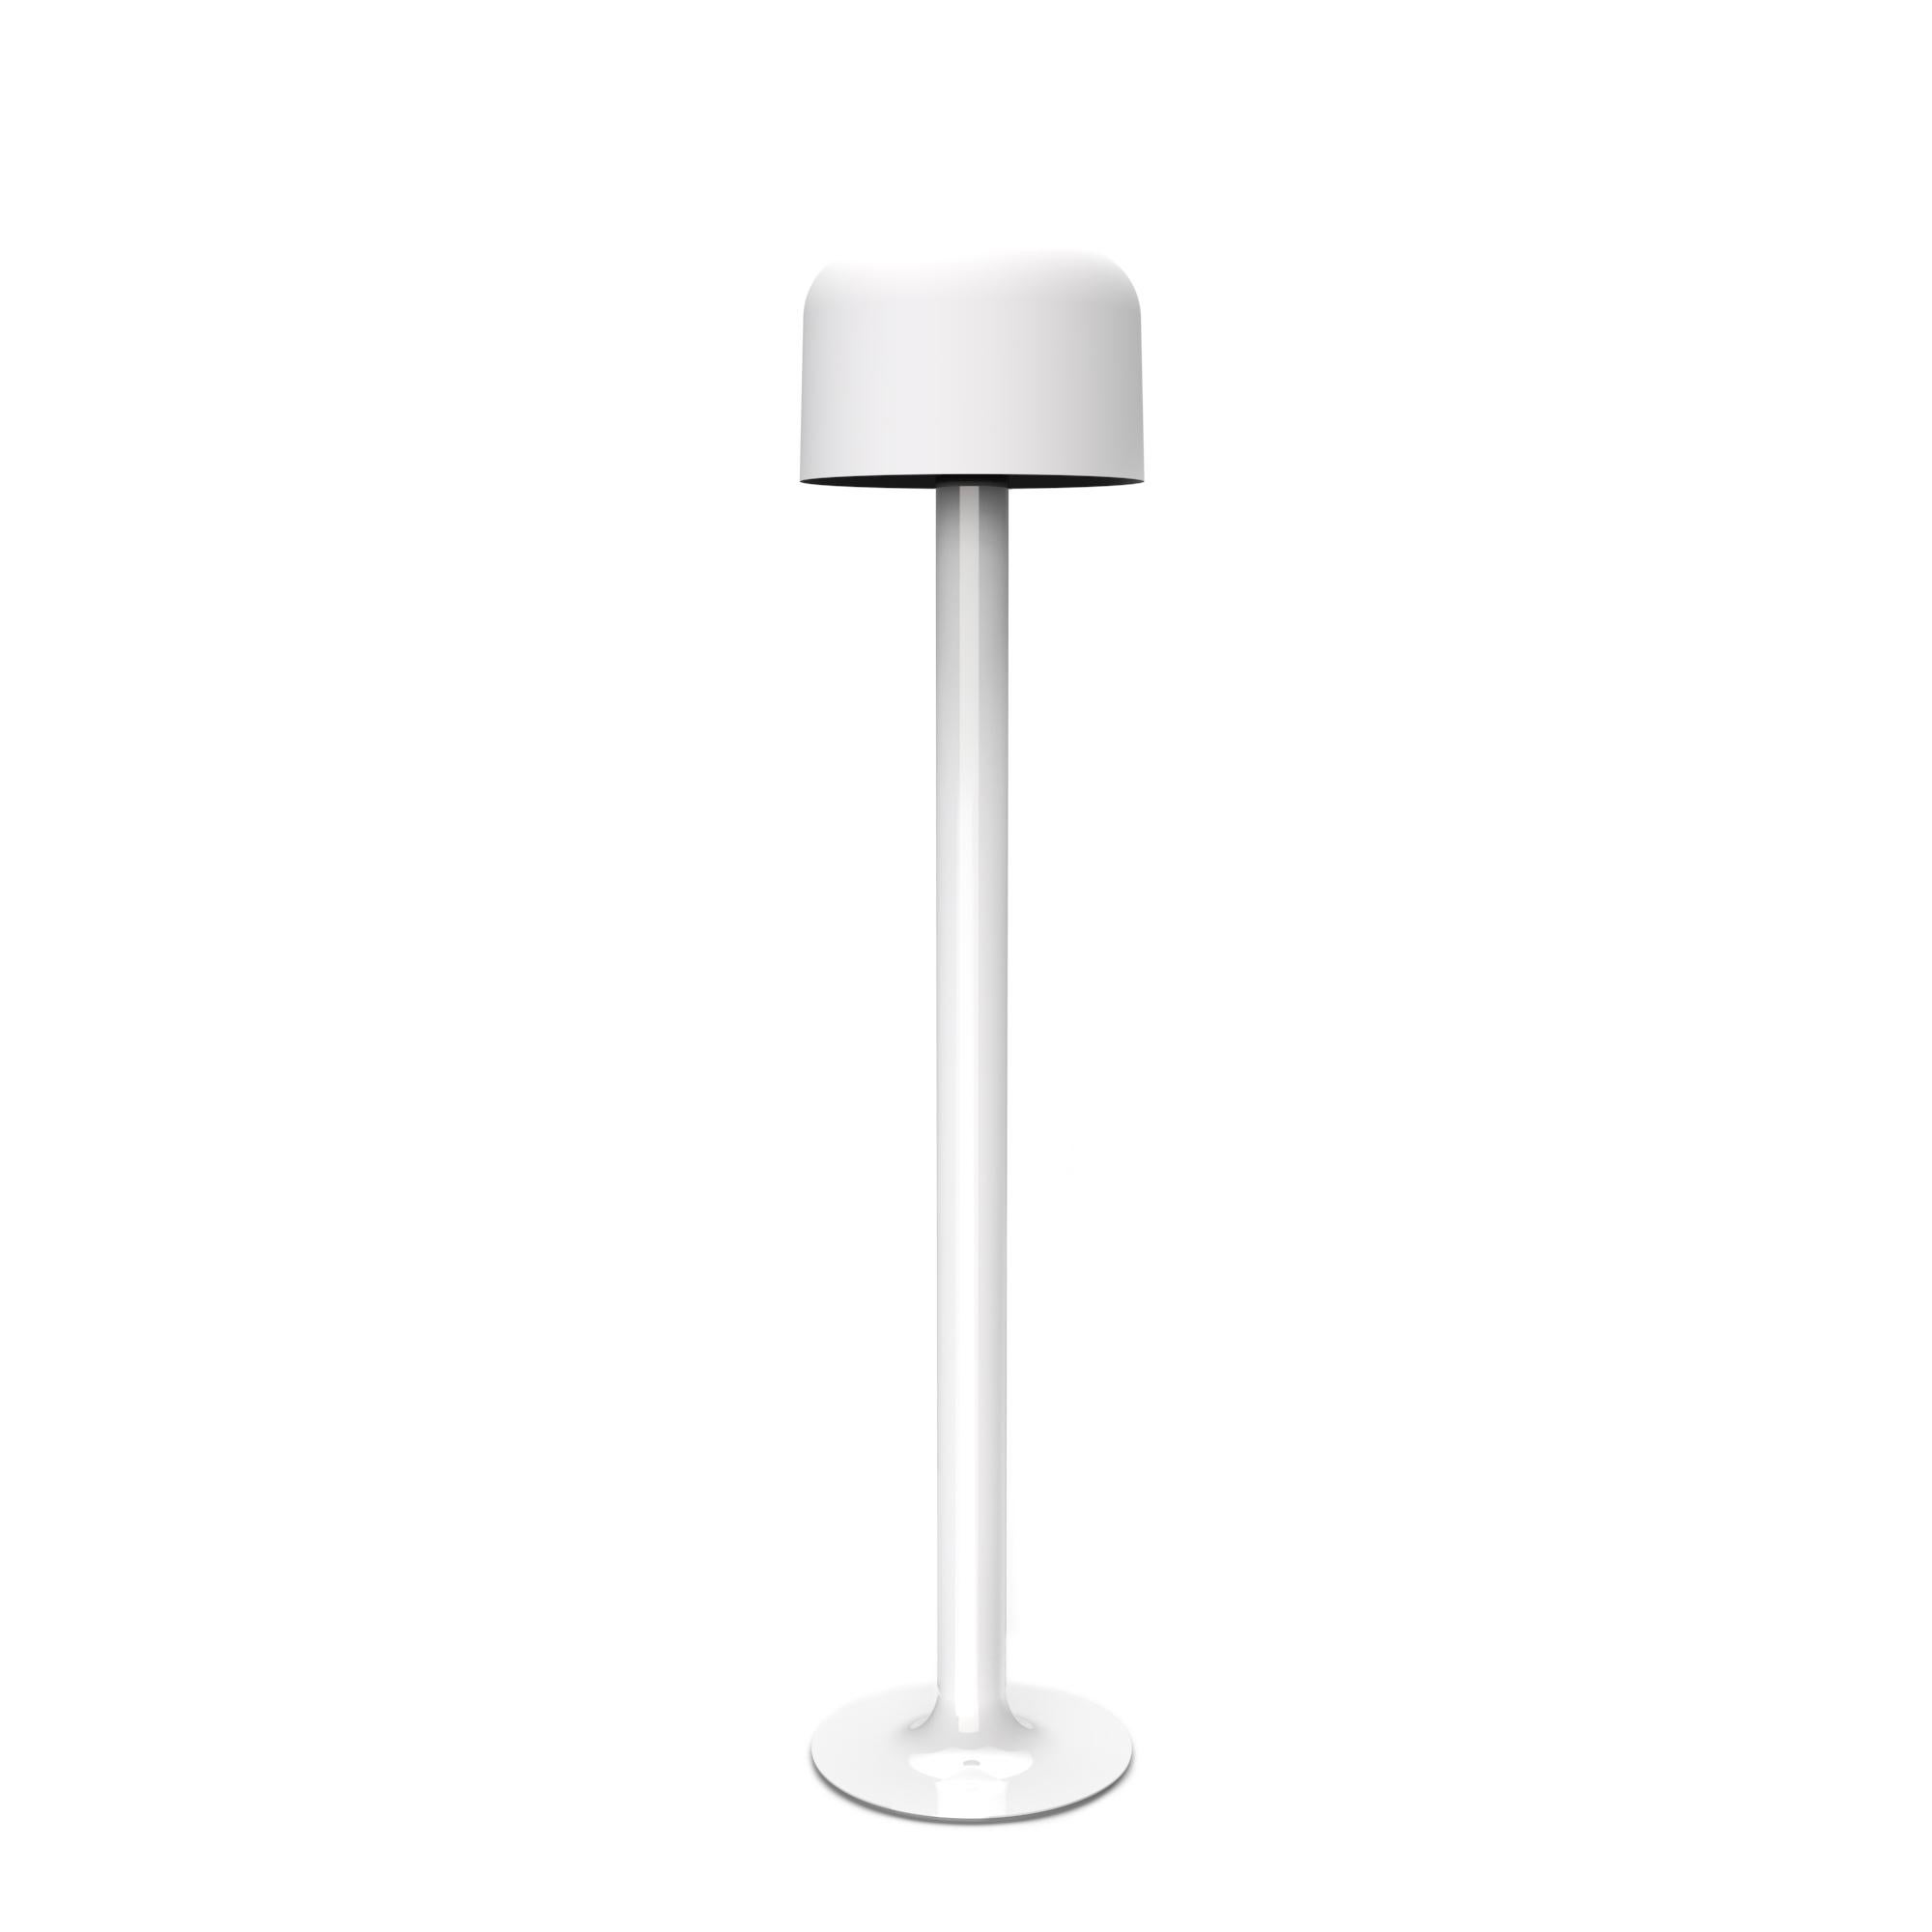 Michel Mortier 10527 metal and glass floor lamp for Disderot in white.

Originally designed in 1972, this sculptural floor lamp is a newly produced numbered edition with an authentication certificate. Made in France by Disderot with many of the